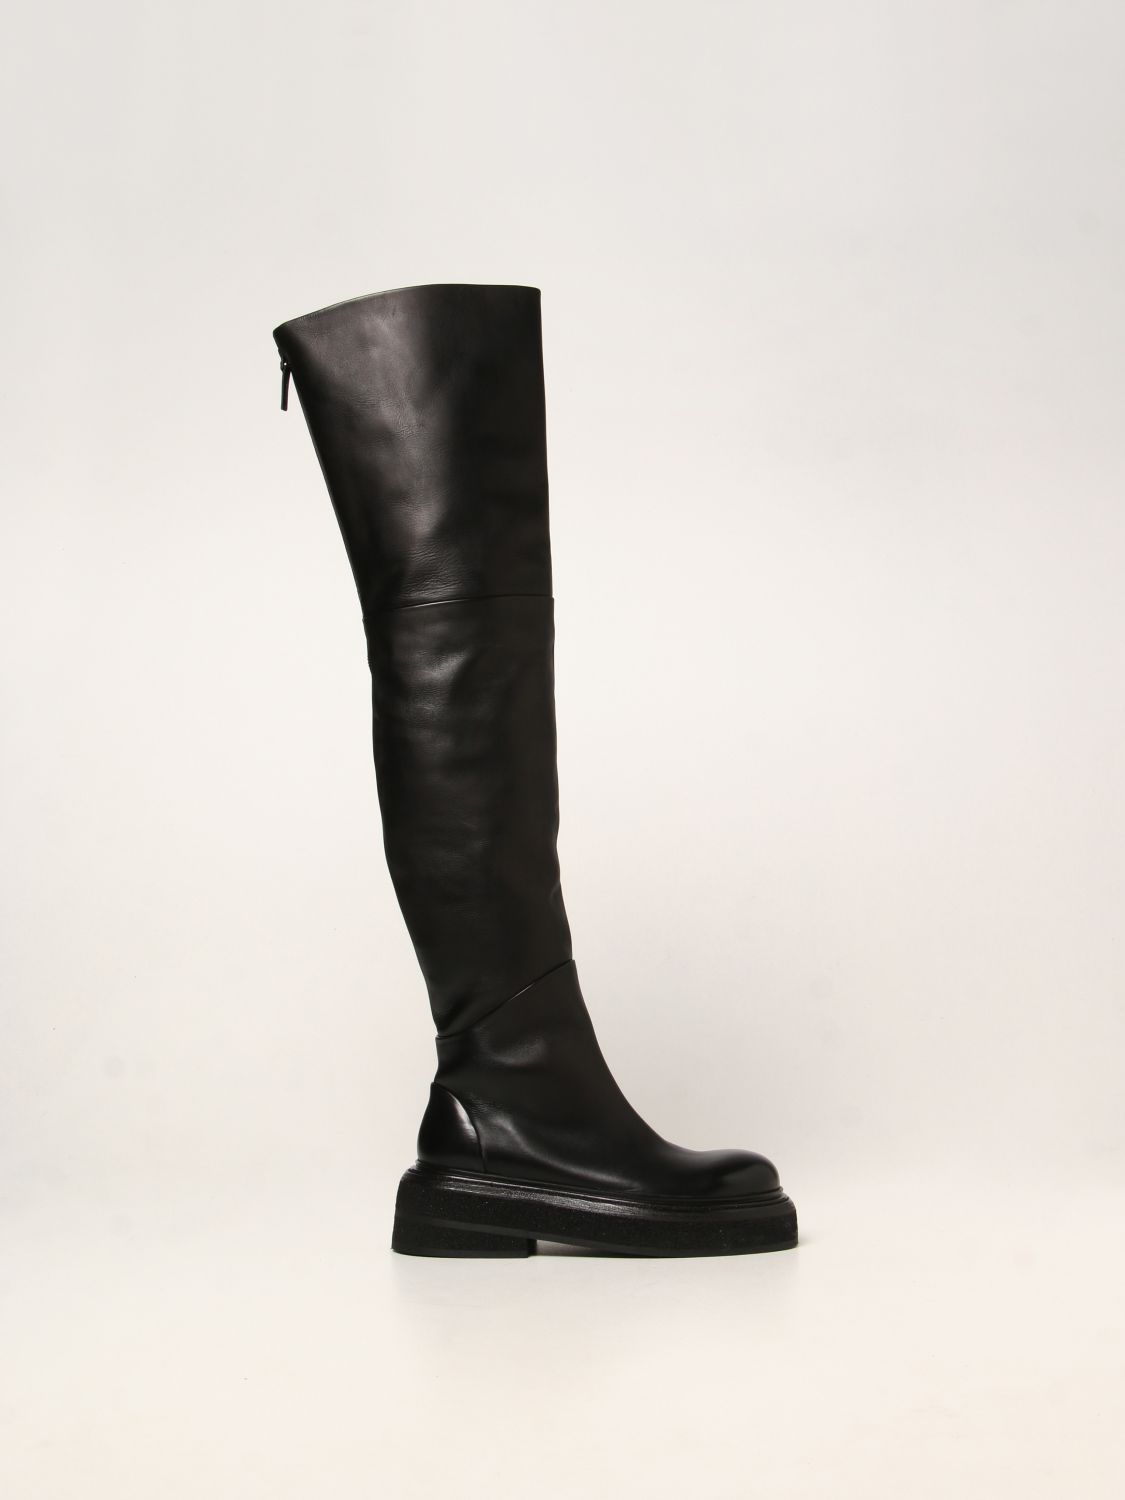 Marsèll Outlet: Zuccone boot in calfskin - Black | Marsèll boots ...